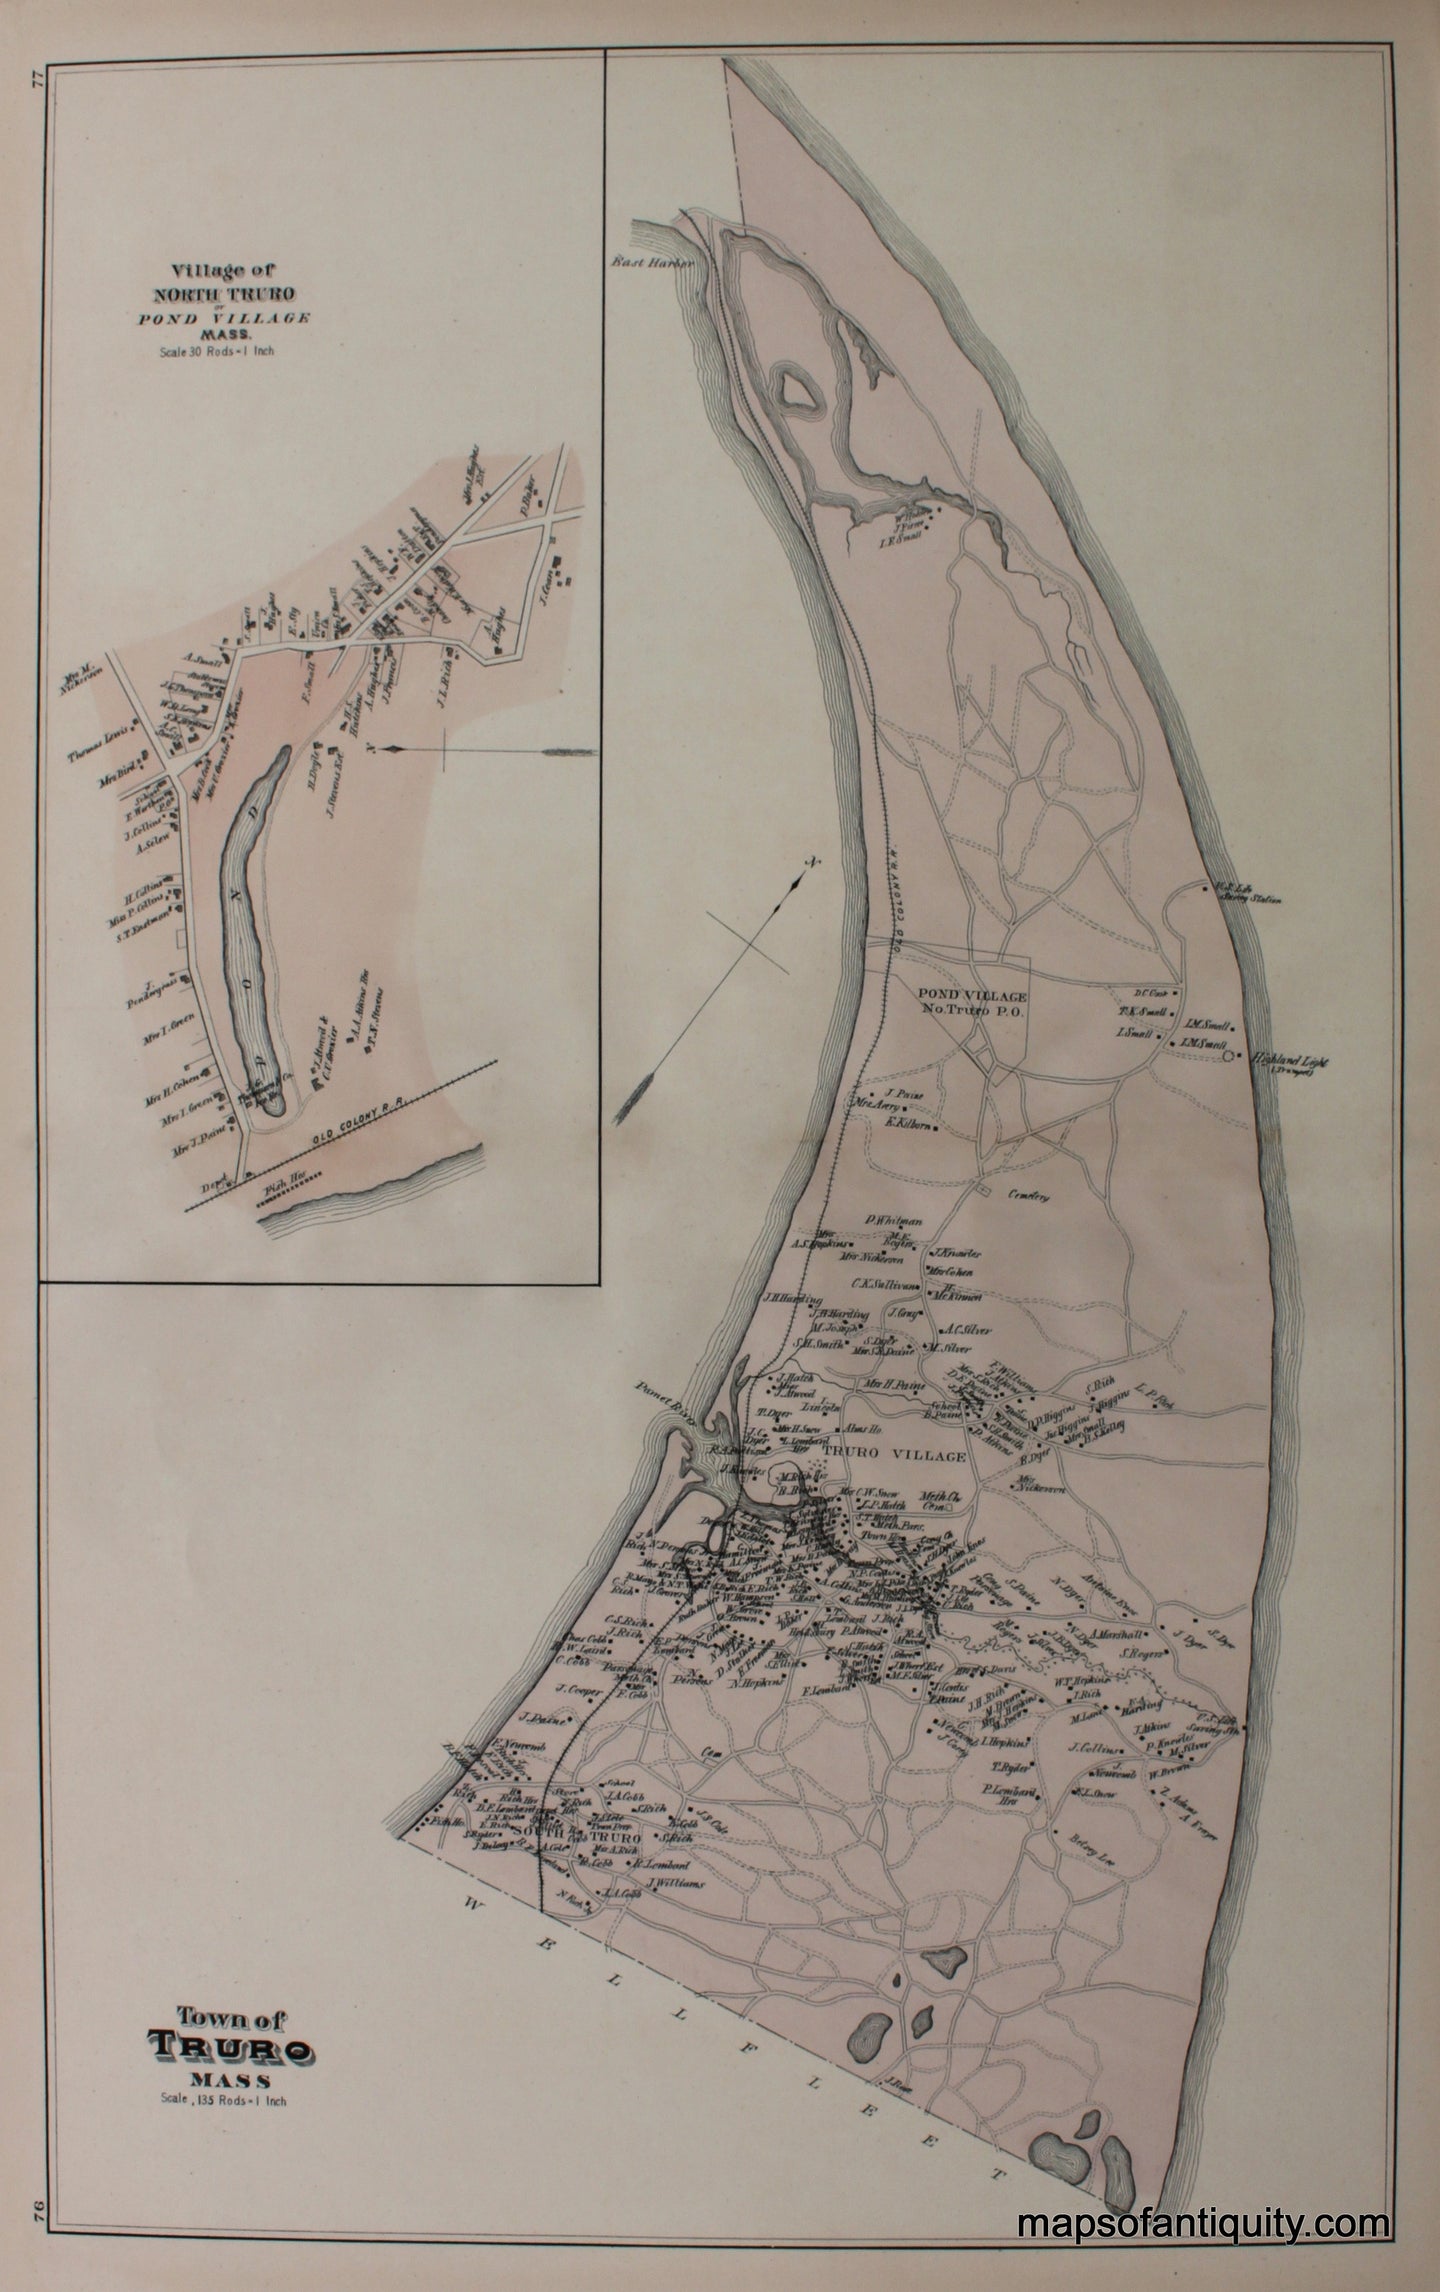 Reproduction-Town-of-Truro-Village-of-North-Truro-pp.-76-77-Town-and-Village-Maps-Atlas-of-Barnstable-County-Walker-1880.---Reproduction---Reproductions-Cape-Cod-and-Islands-Reproduction--Maps-Of-Antiquity